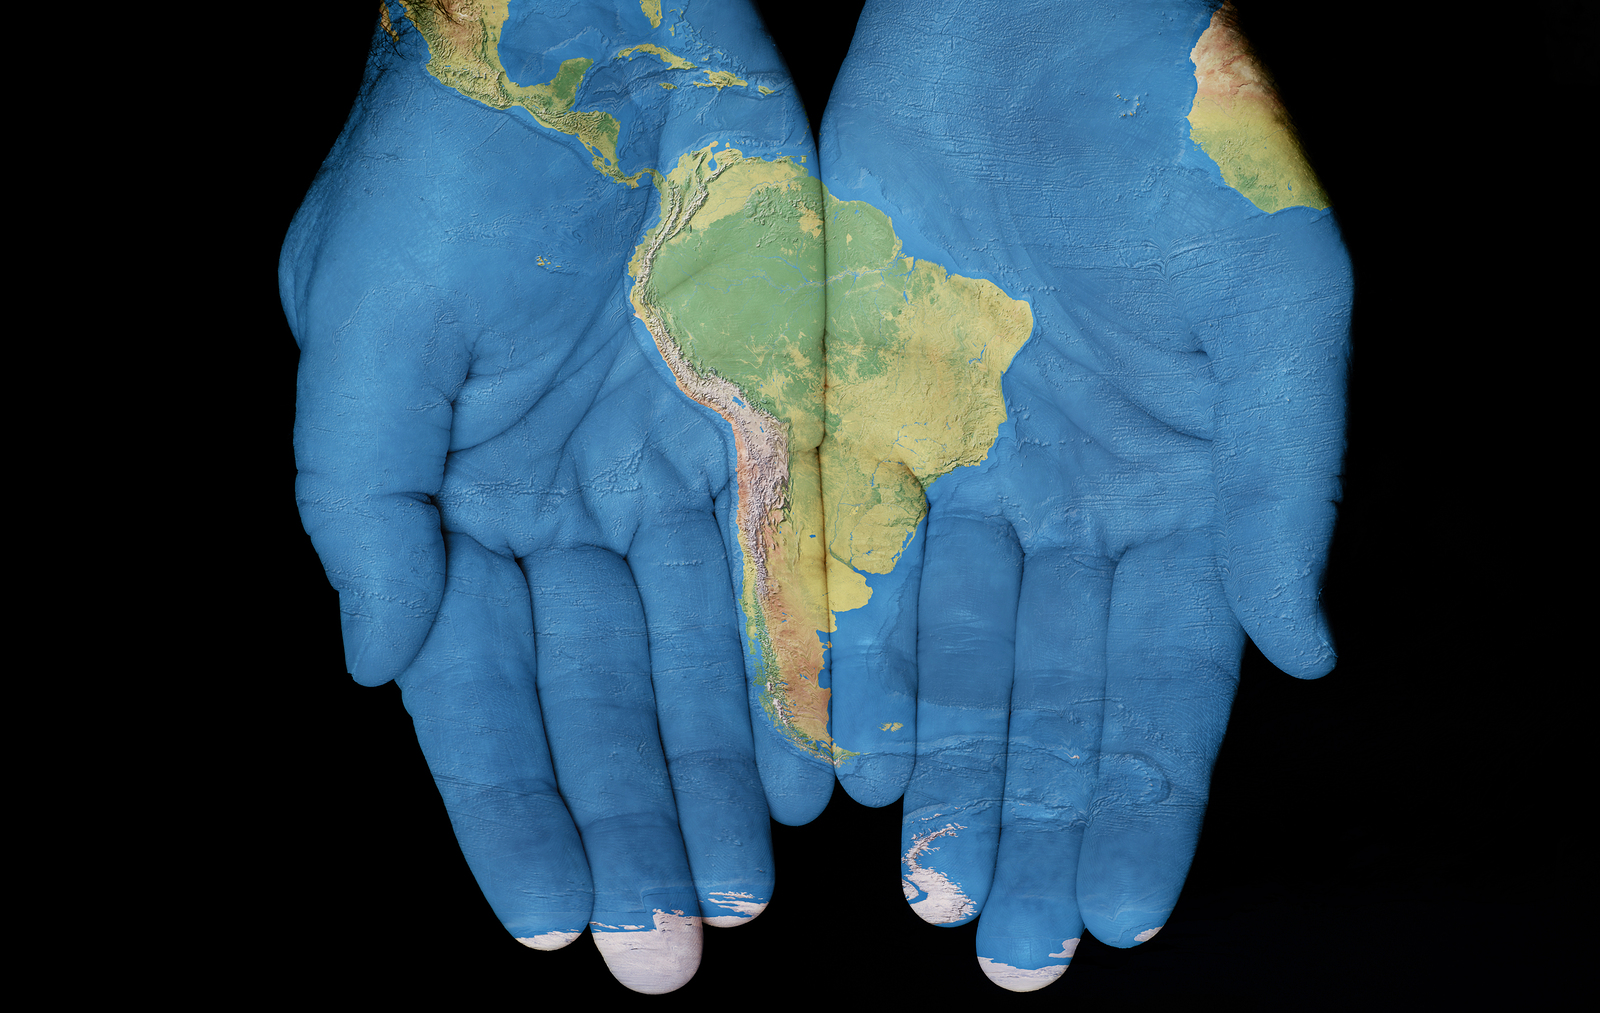 a pair of hands with a map of the world